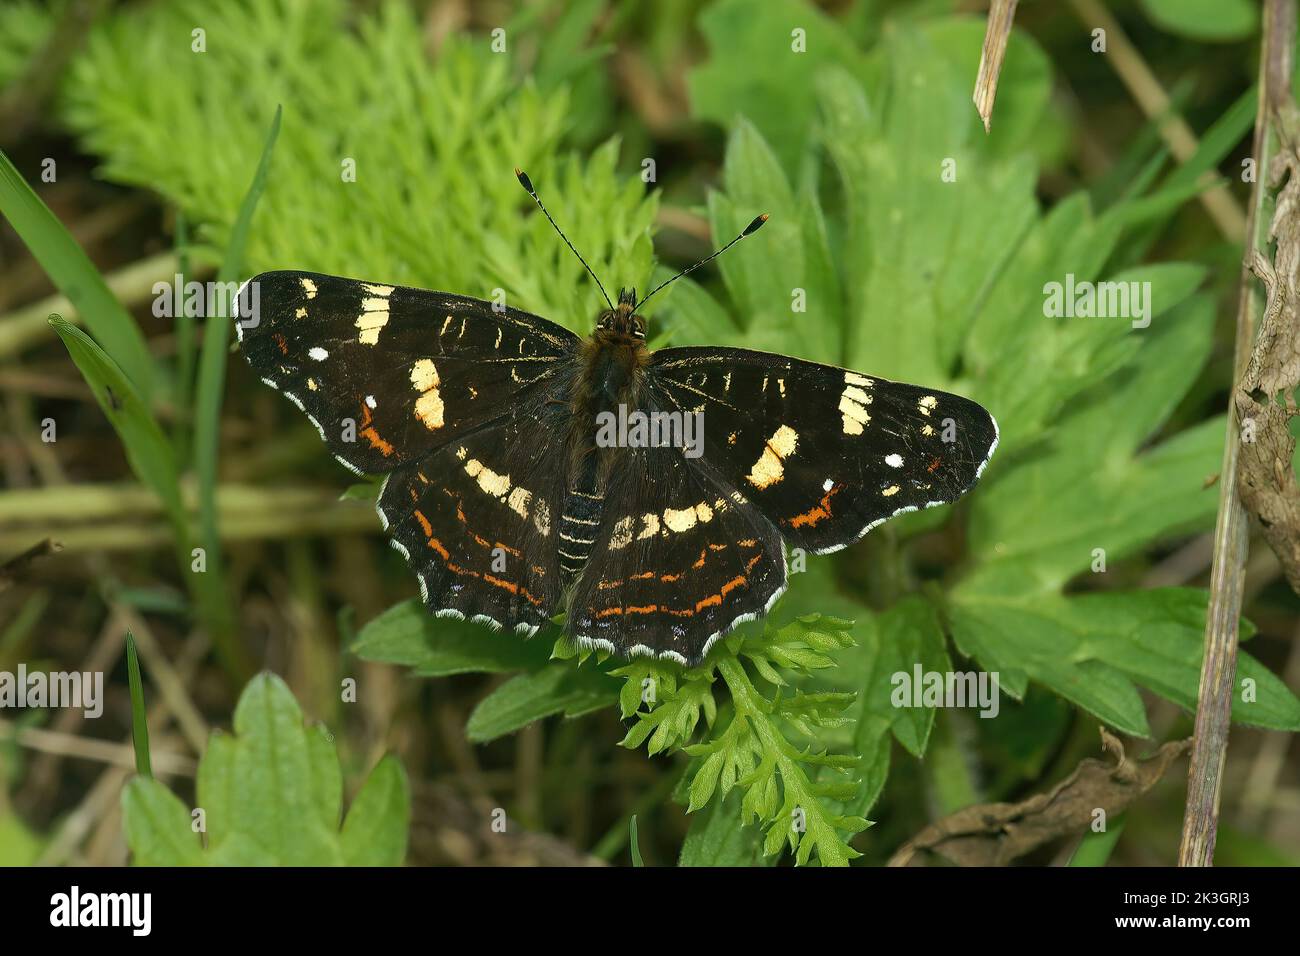 Closeup on a brown Map butterfly, Araschnia elvana wiith spread wings in the field Stock Photo